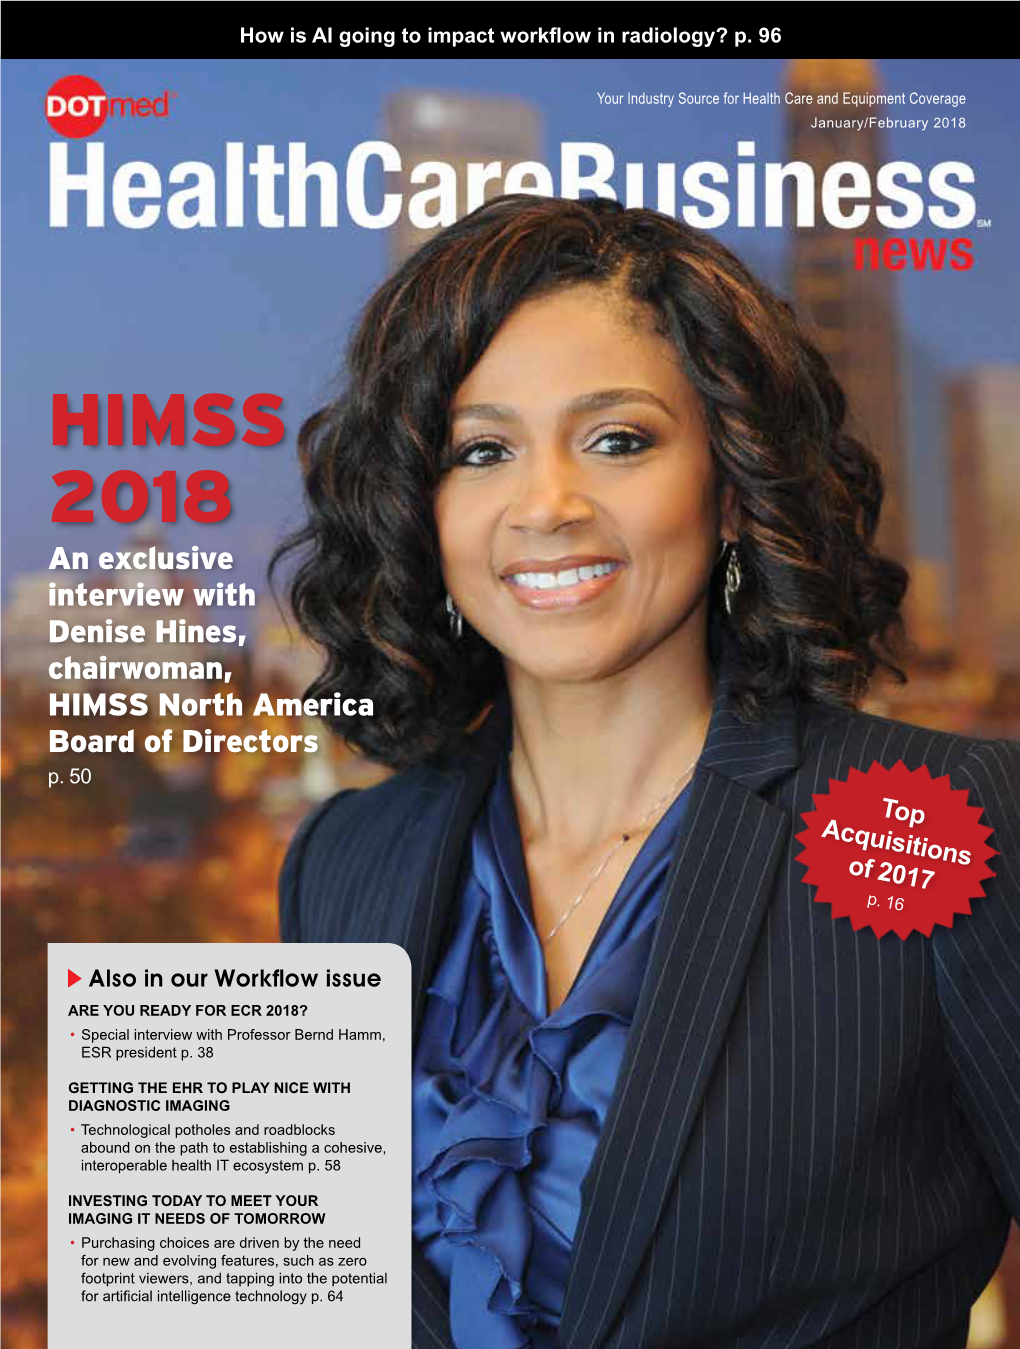 HIMSS 2018 an Exclusive Interview with Denise Hines, Chairwoman, HIMSS North America Board of Directors P